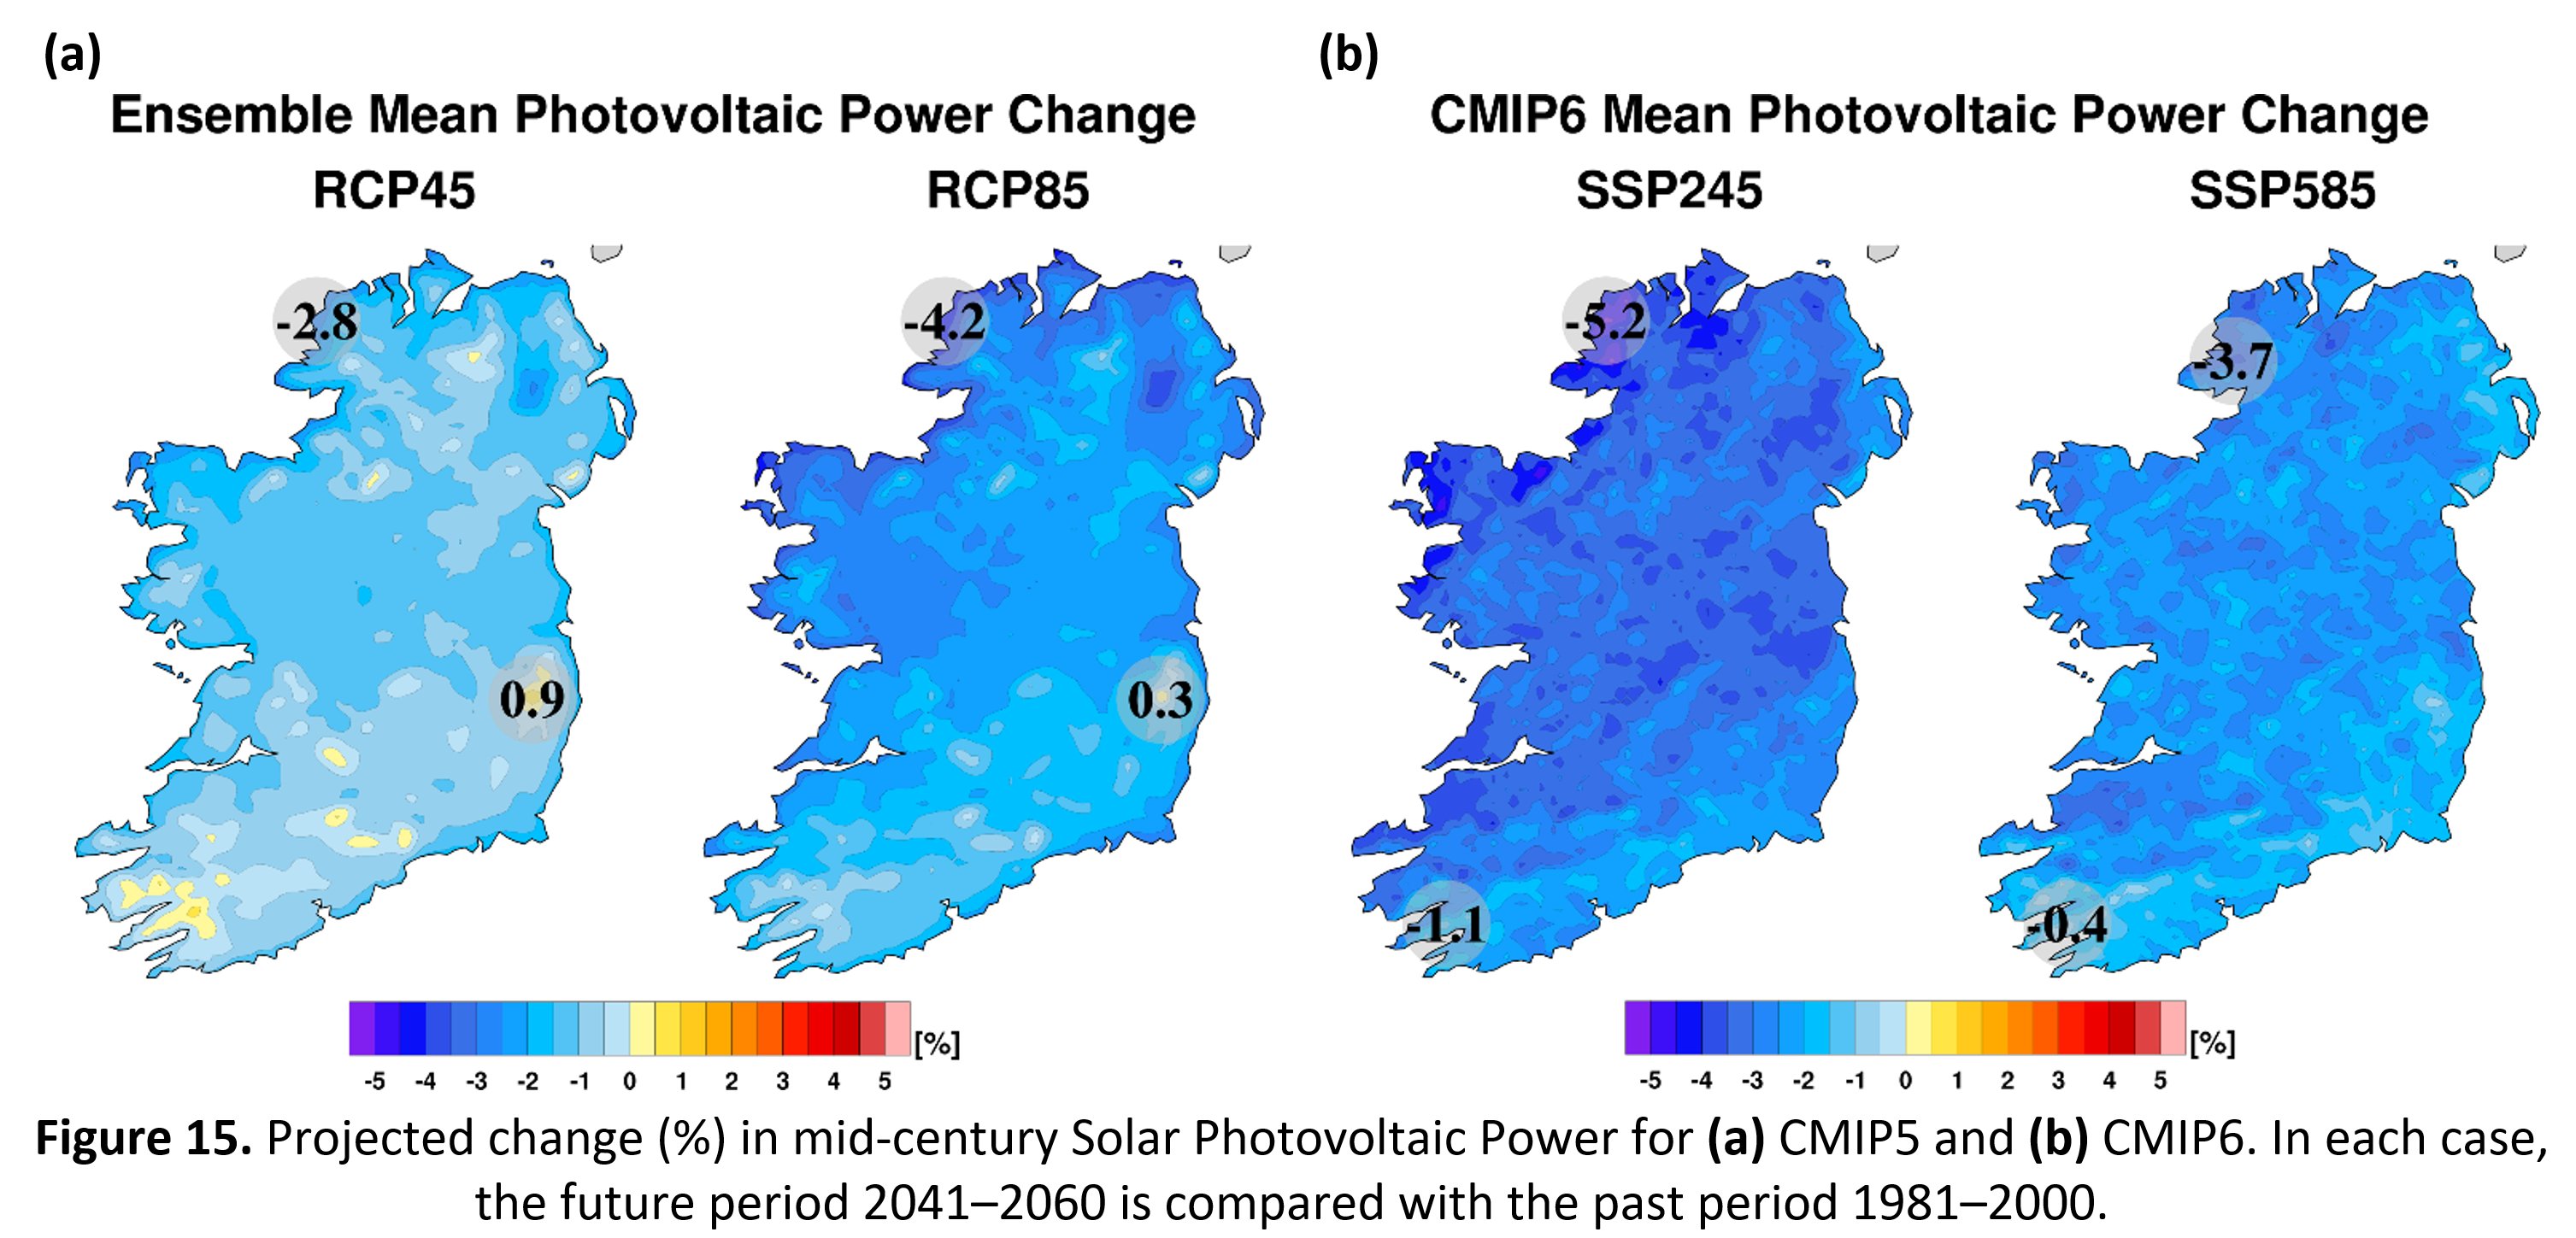 Figure 15. Projected change (%) in mid-century Solar Photovoltaic Power for (a) CMIP5 and (b) CMIP6. In each case, the future period 2041–2060 is compared with the past period 1981–2000.